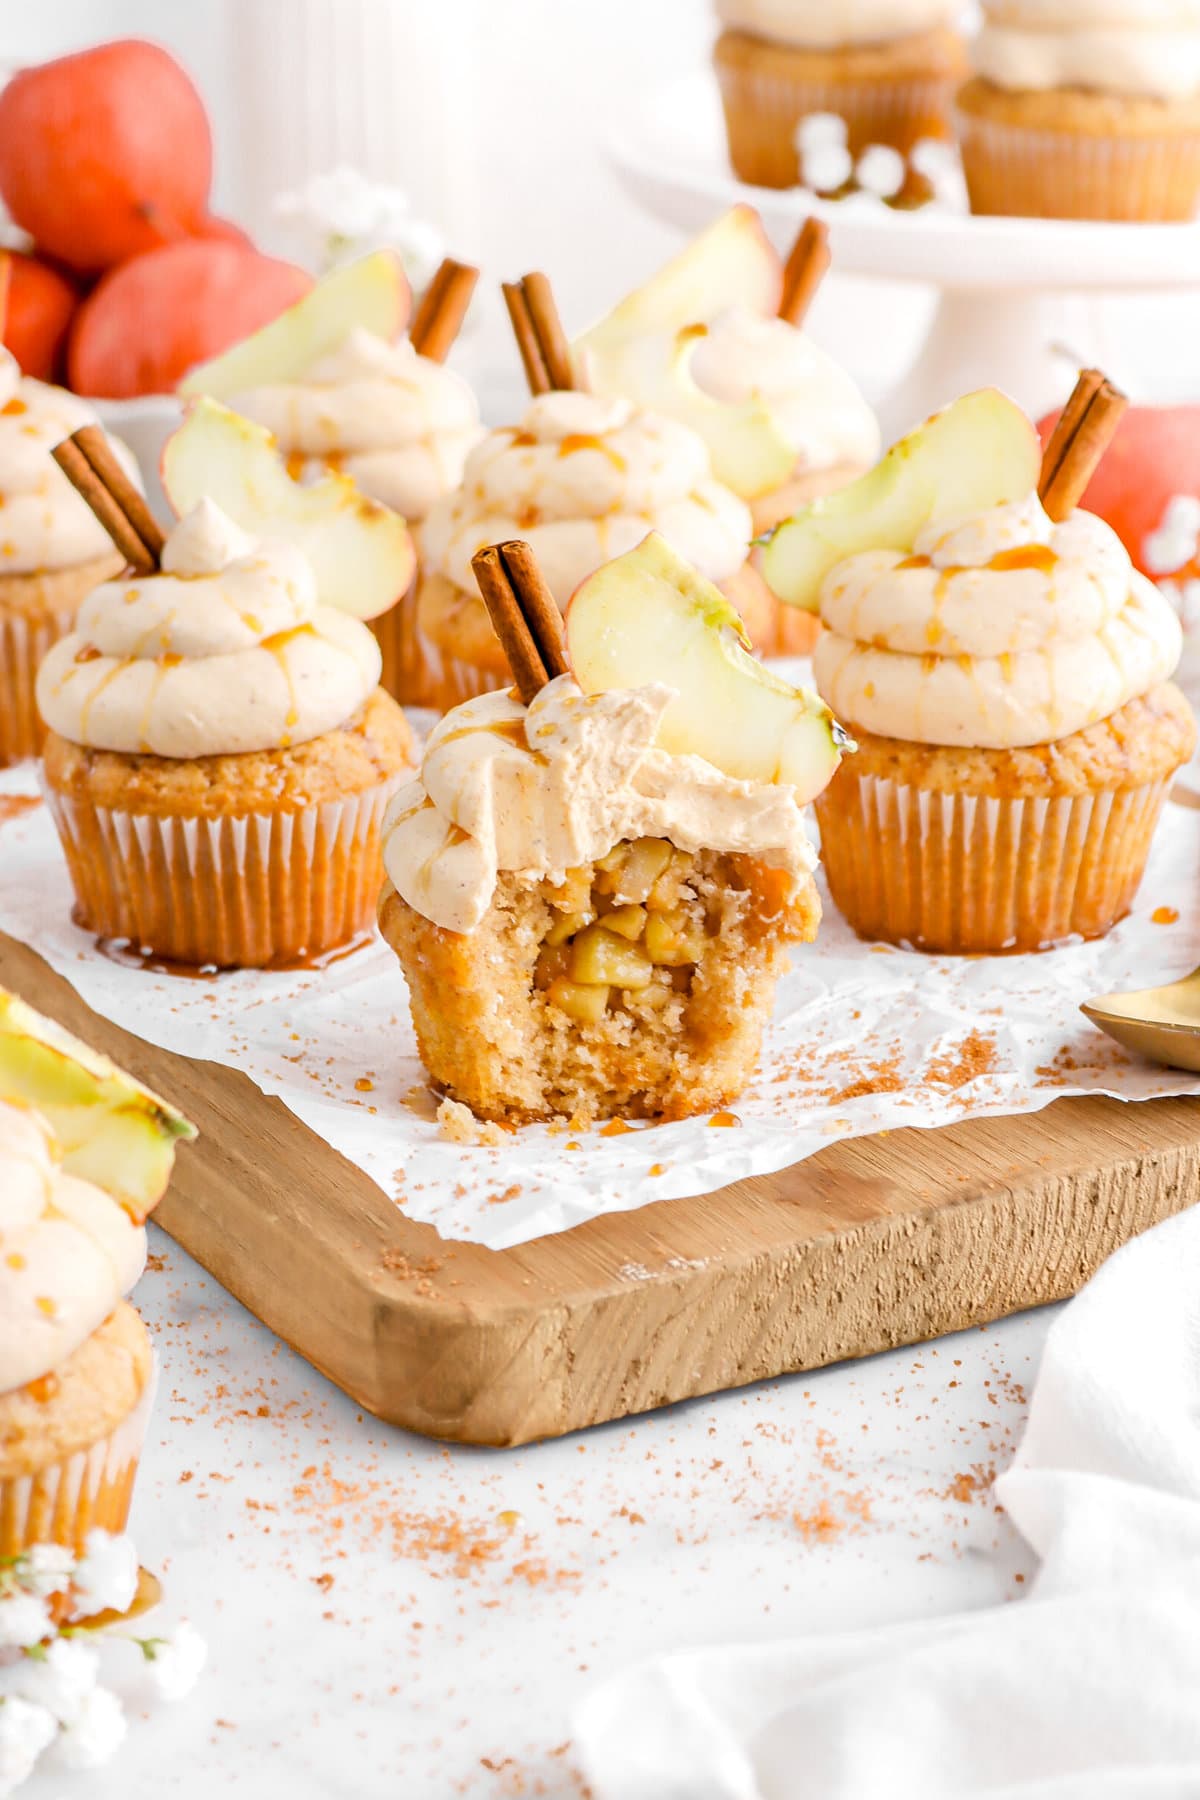 angled image of four cupcakes on wood board with one cupcake missing a bite and apples behind.